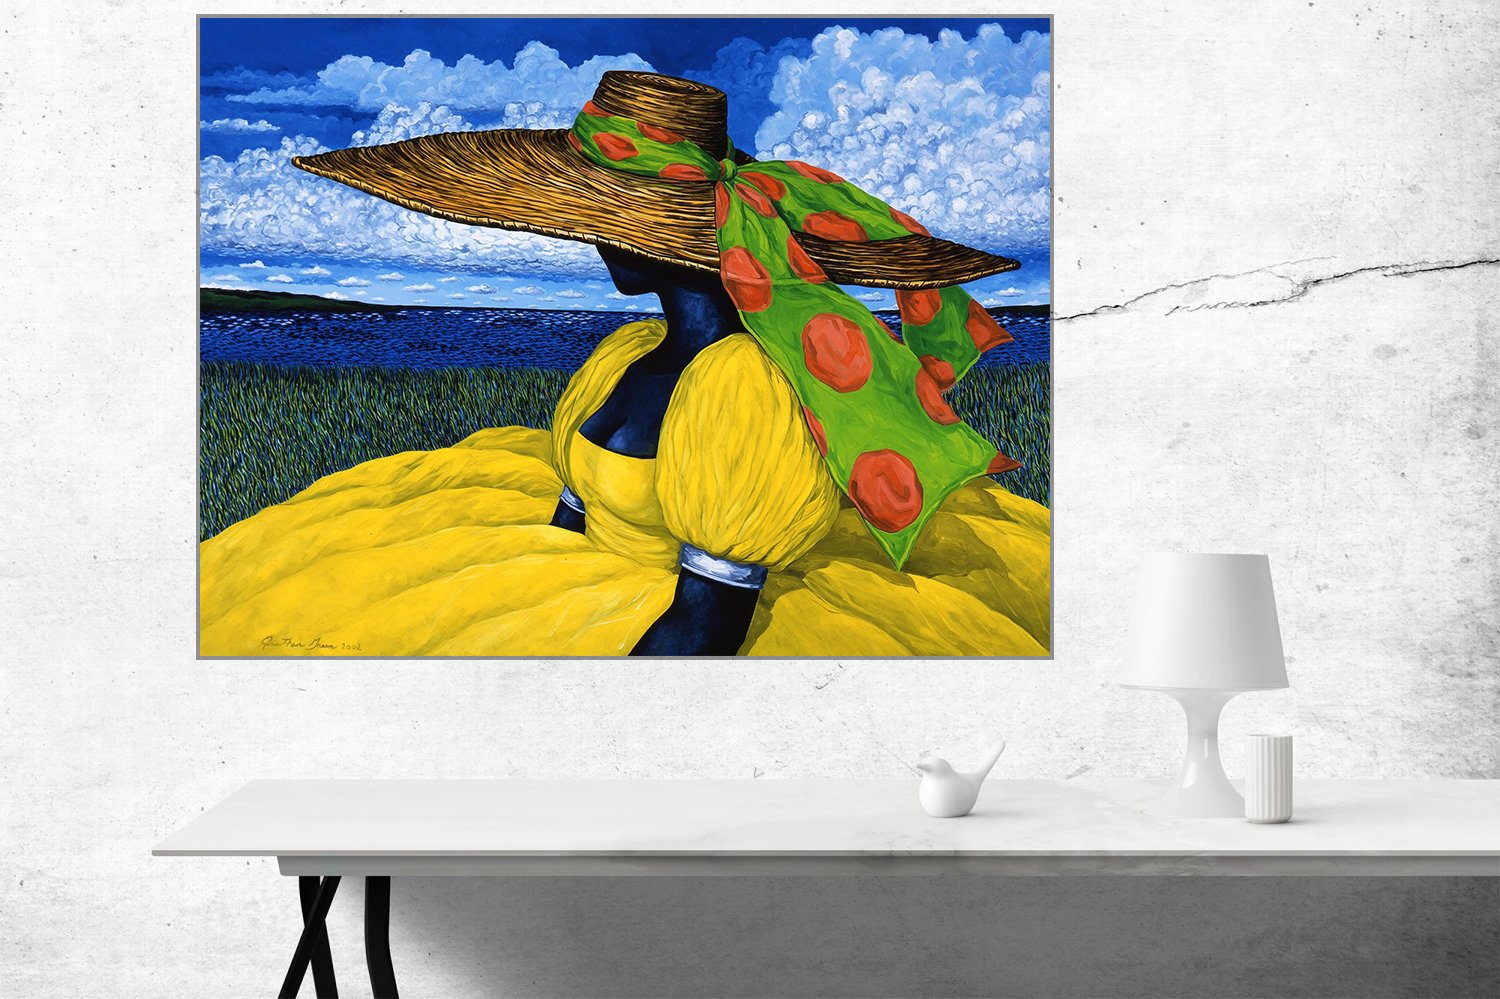 African American Art Print By J. Green 31x24 inches Canvas Print